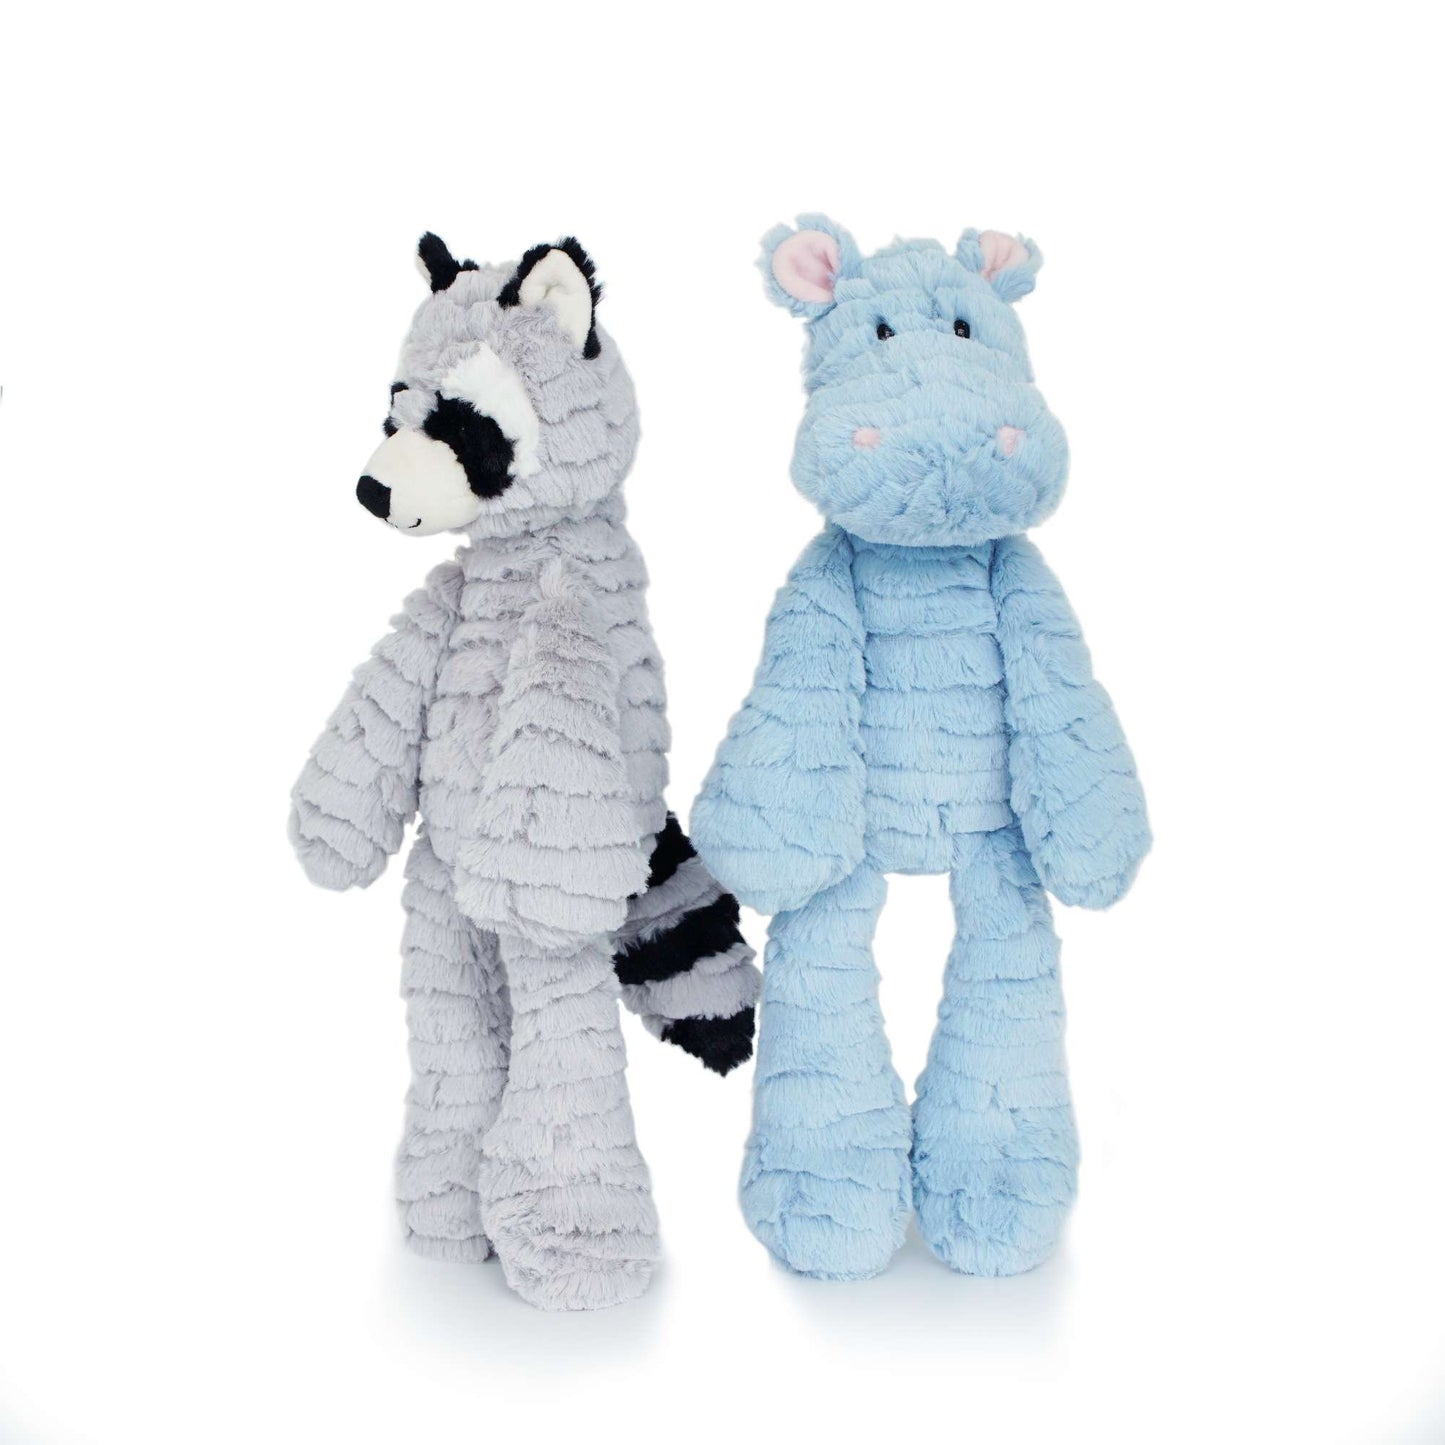 Hippo and raccoon group photos PlushThis